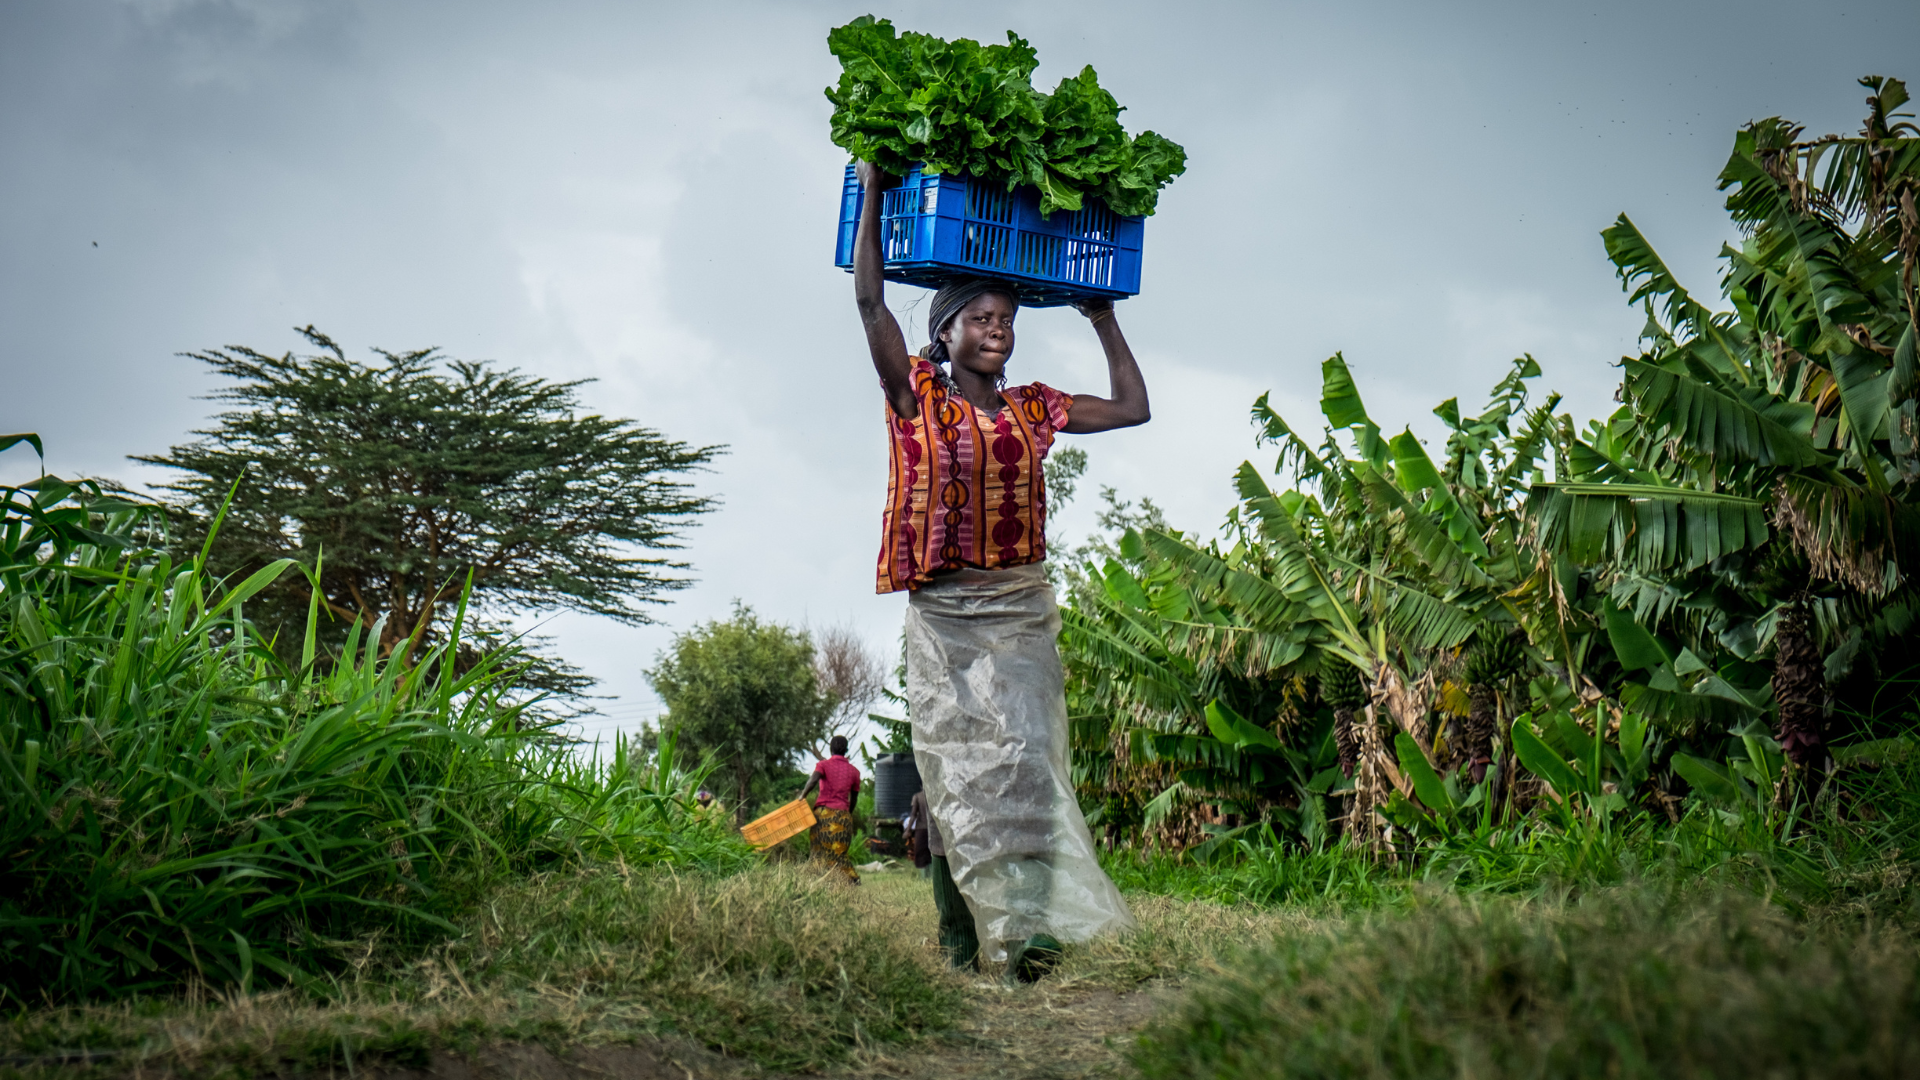 Woman in forest carries basket on vegetables as she walks through a clearing